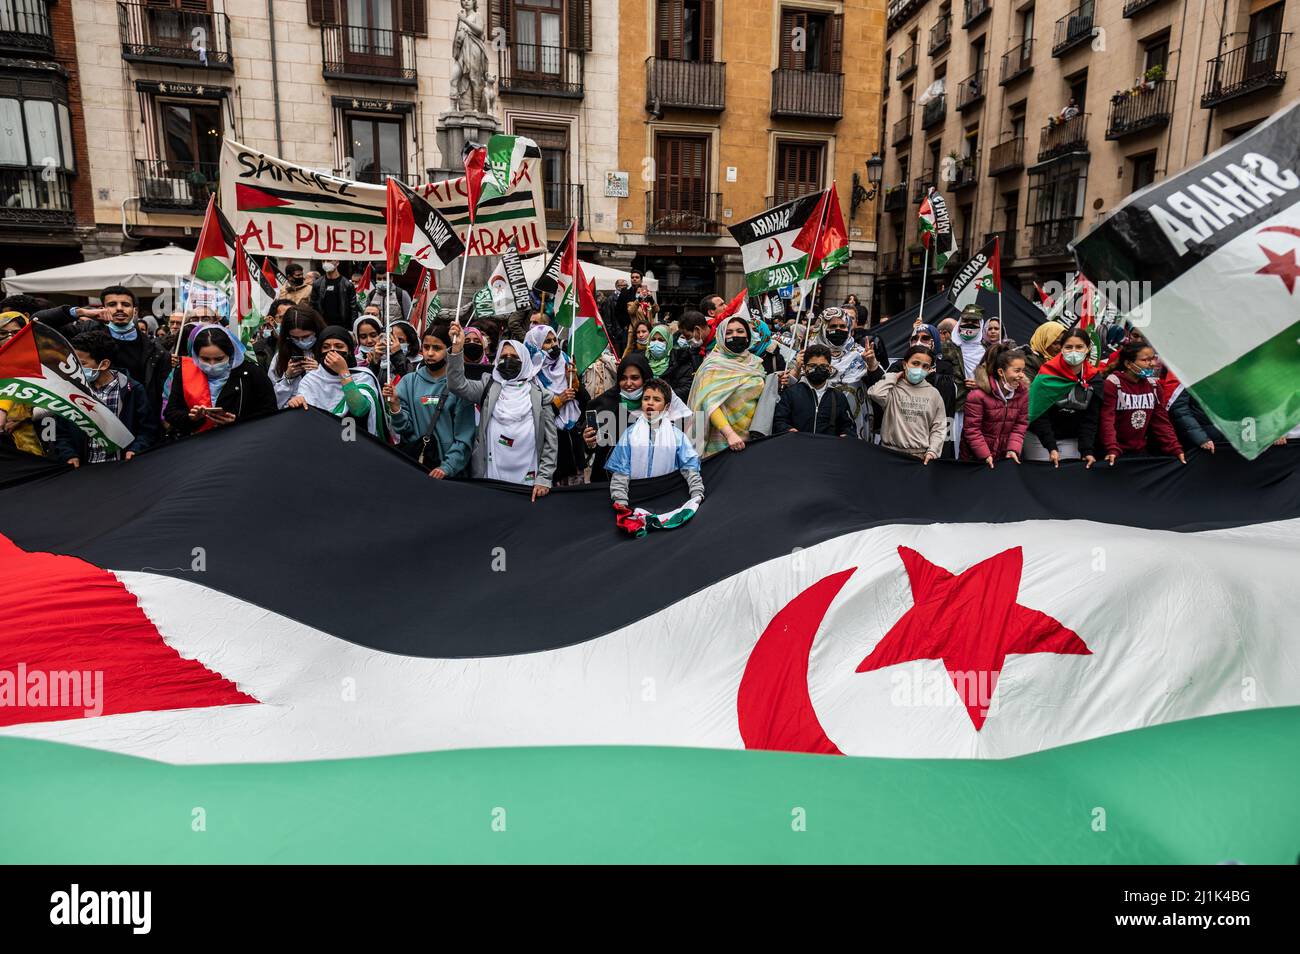 Madrid, Spain. 26th Mar, 2022. Saharawi community and supporters are seen waving a large flag during a demonstration in front of the Ministry of Foreign Affairs. Thousands have gathered to protest against the Spanish government's support for Morocco's autonomy plan for Western Sahara, which grants a limited autonomy to Western Sahara. Pro-independence groups as well as Algeria oppose the proposal. Credit: Marcos del Mazo/Alamy Live News Stock Photo